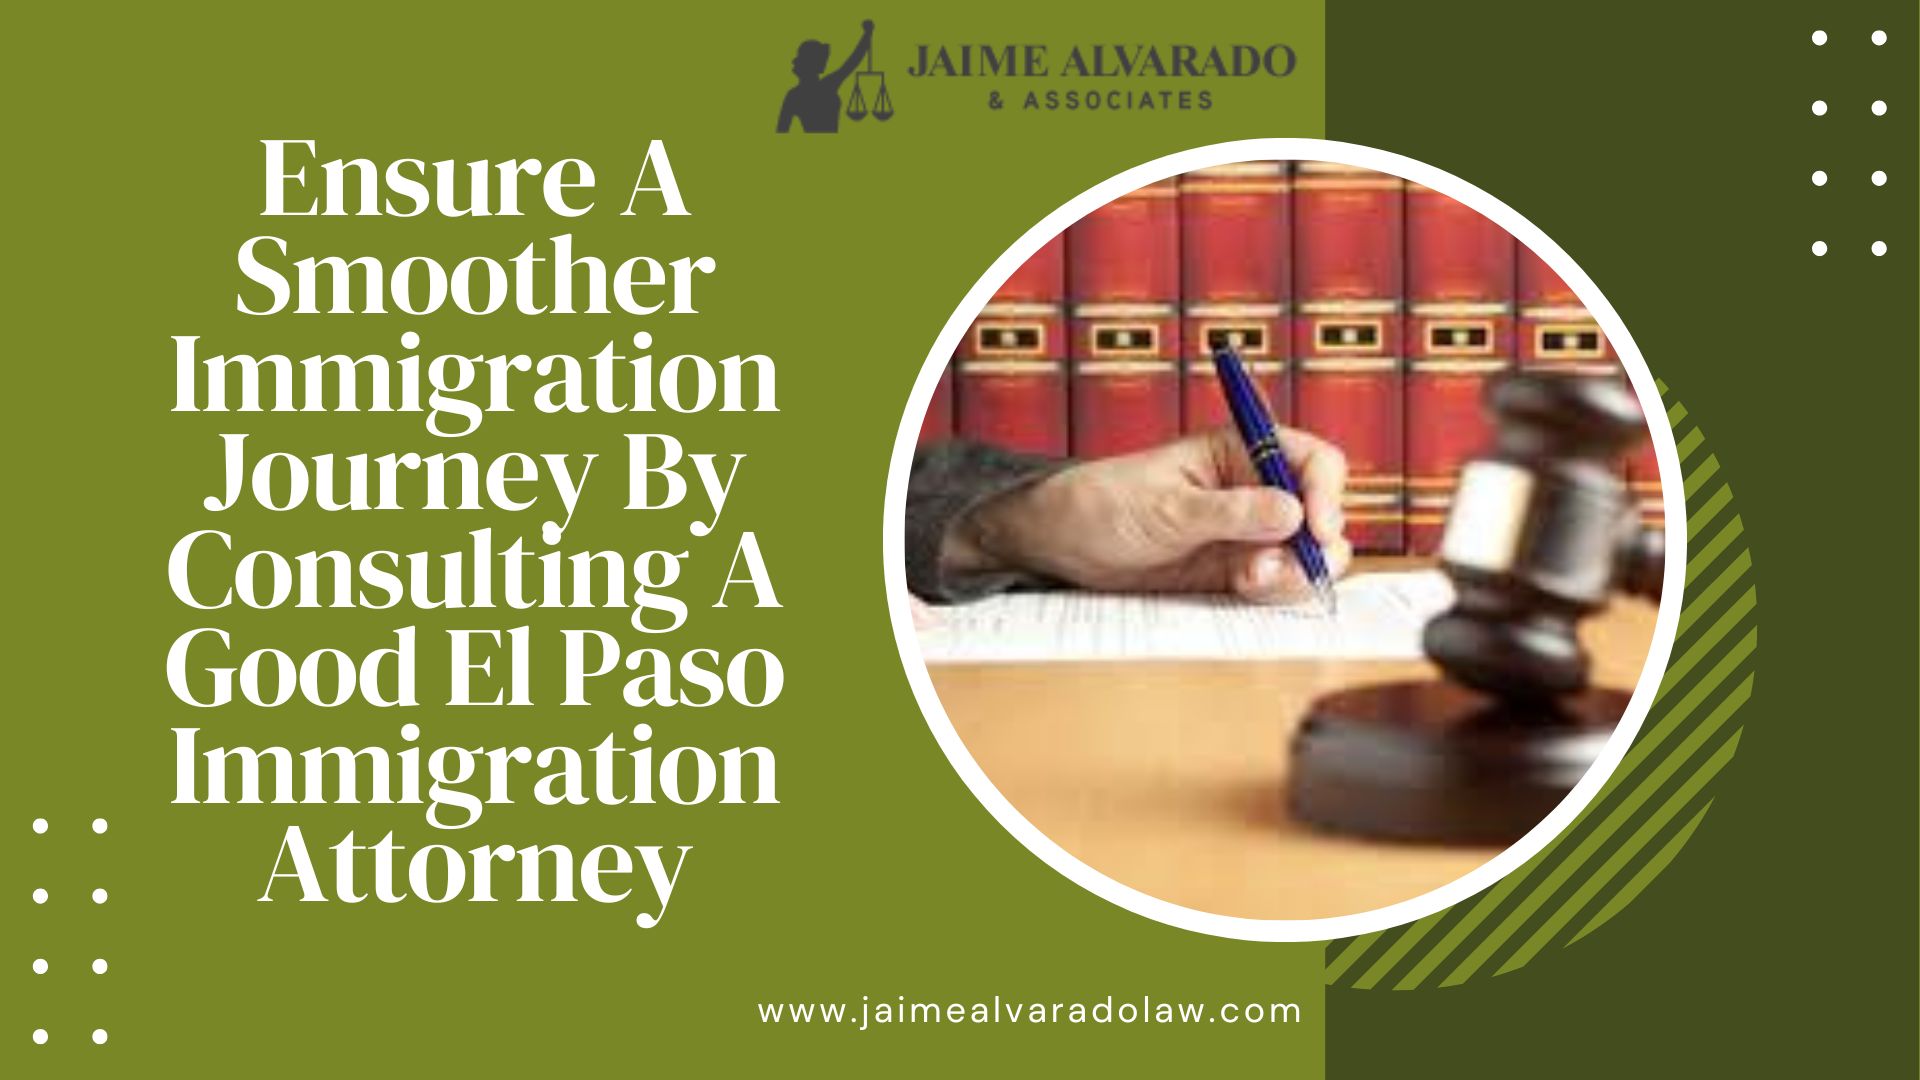 Ensure A Smoother Immigration Journey By Consulting A Good El Paso Immigration Attorney-892036a0